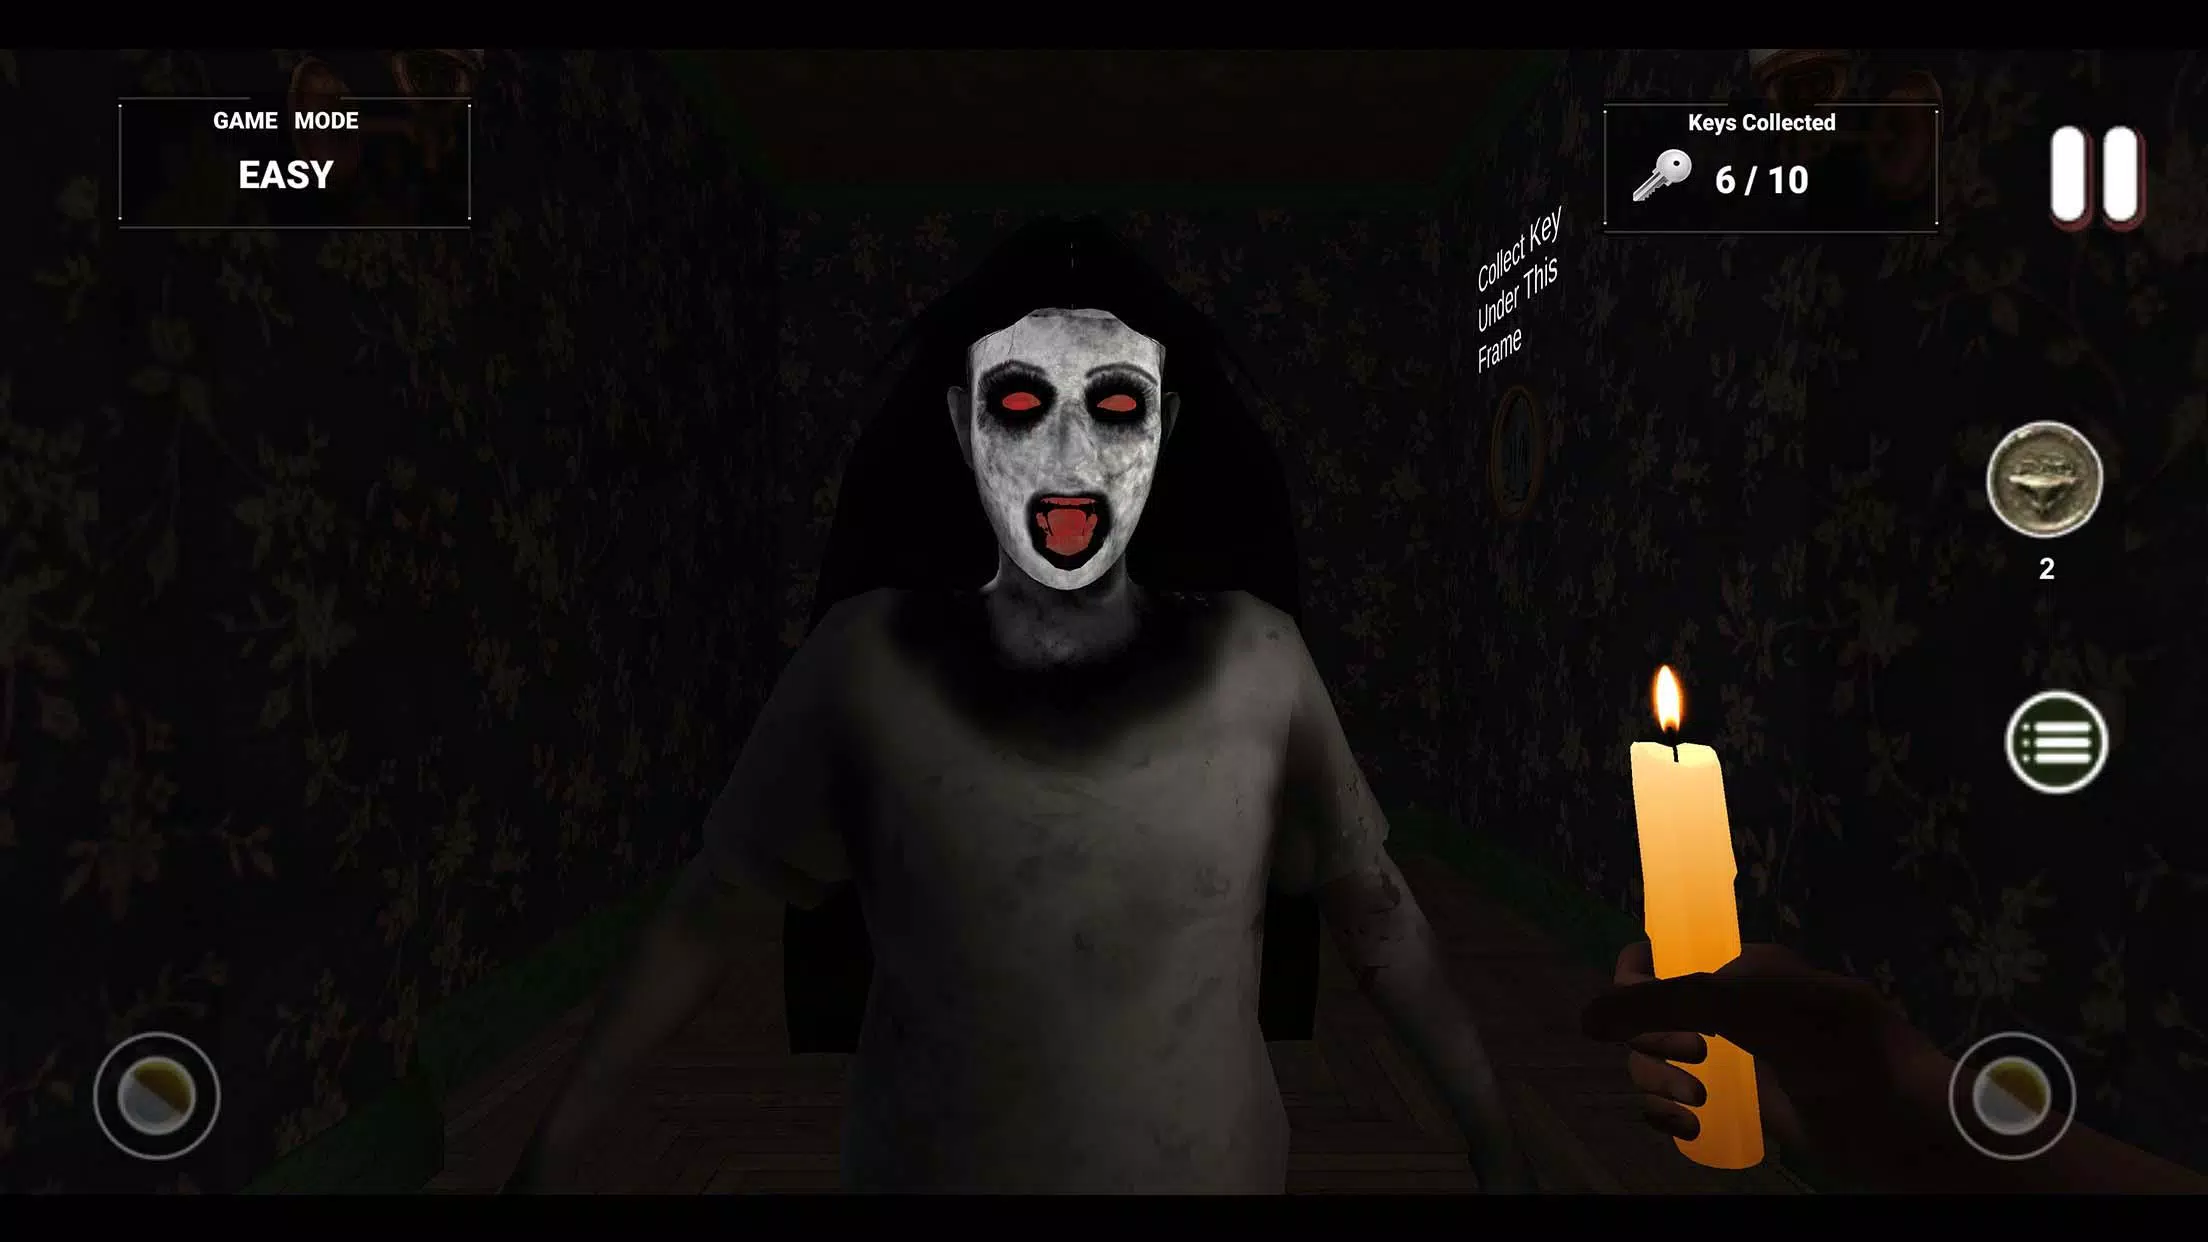 Eyes - The Horror Game 1.0 2 Download - Play Eyes - The Horror Game 1.0 2  Download On FNAF, Granny, Backrooms - Play Online Horror Games For Free!